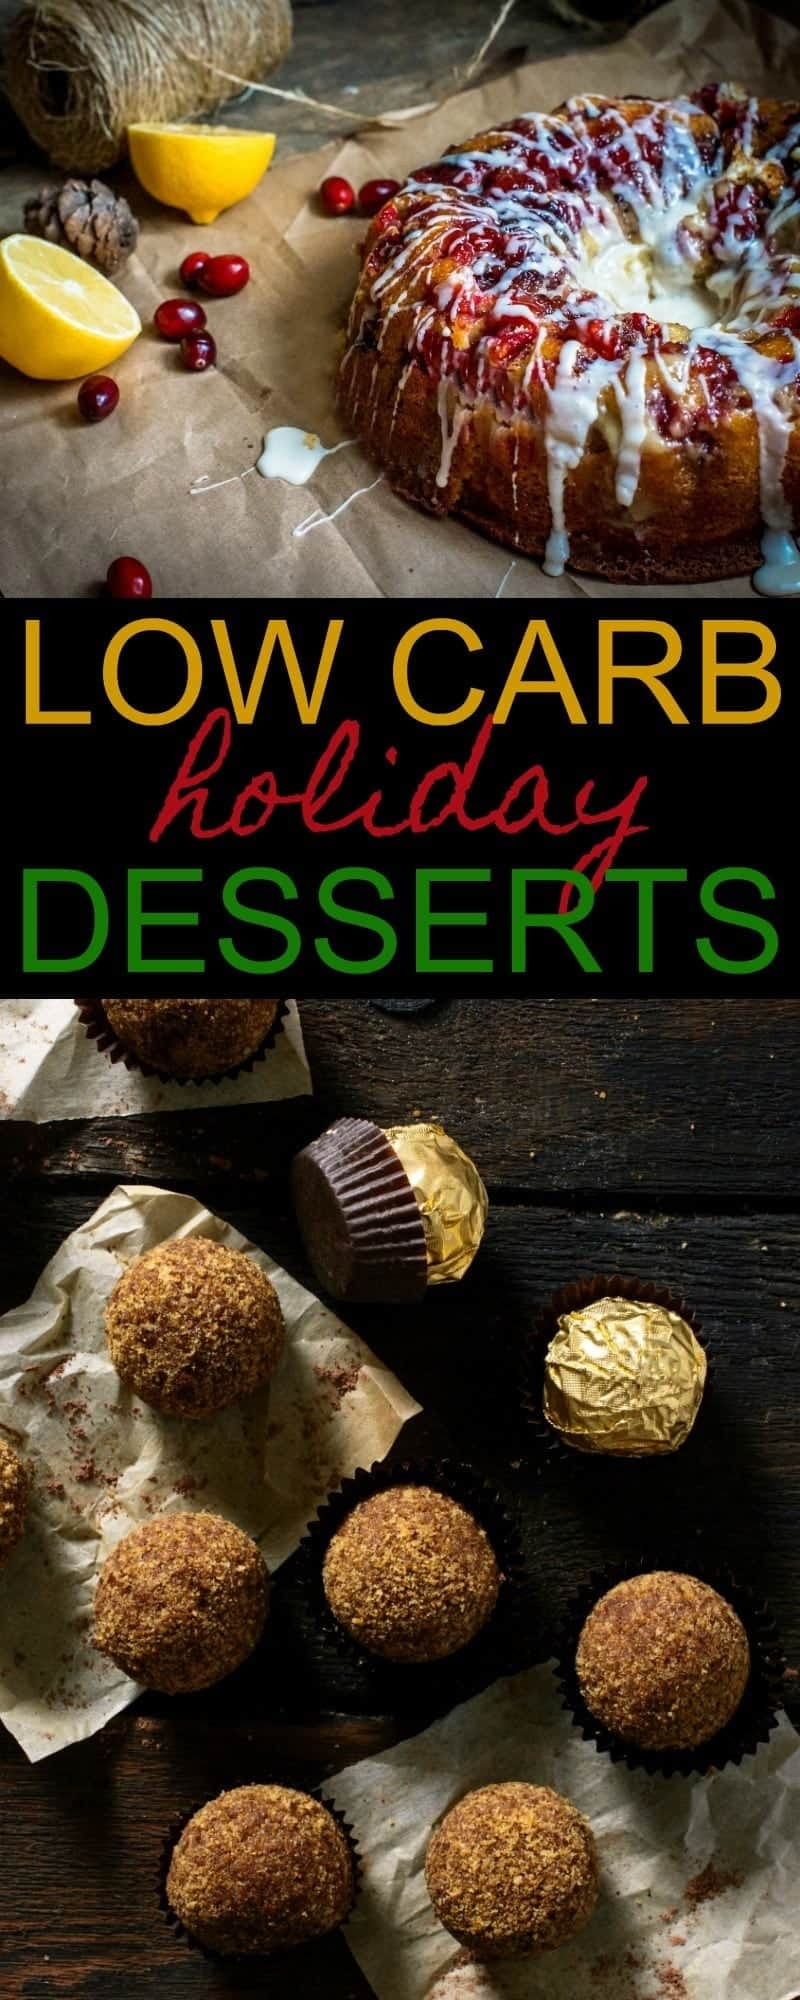 Low Carb Holiday Desserts Best Of Low Carb Holiday Desserts 15 Delicious Recipes 730